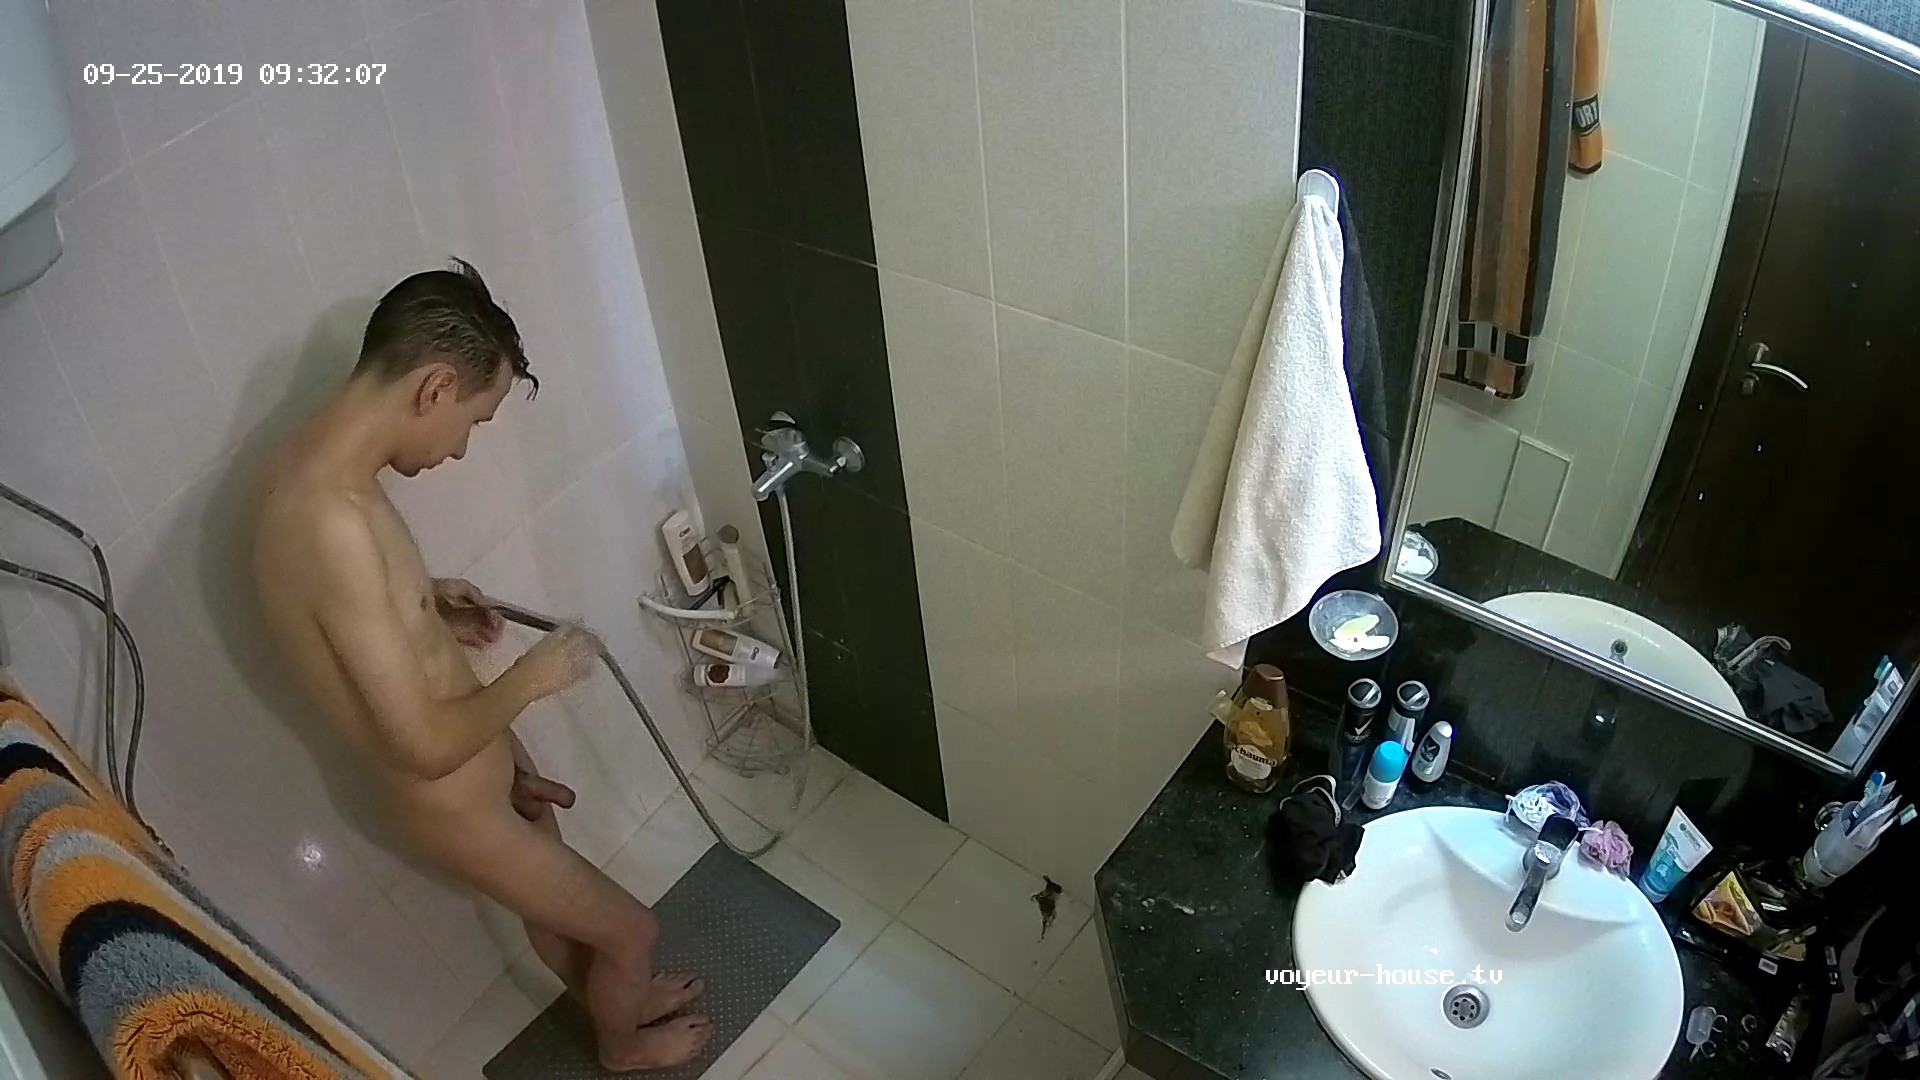 Guest Guy Shower 25 Sep 2019